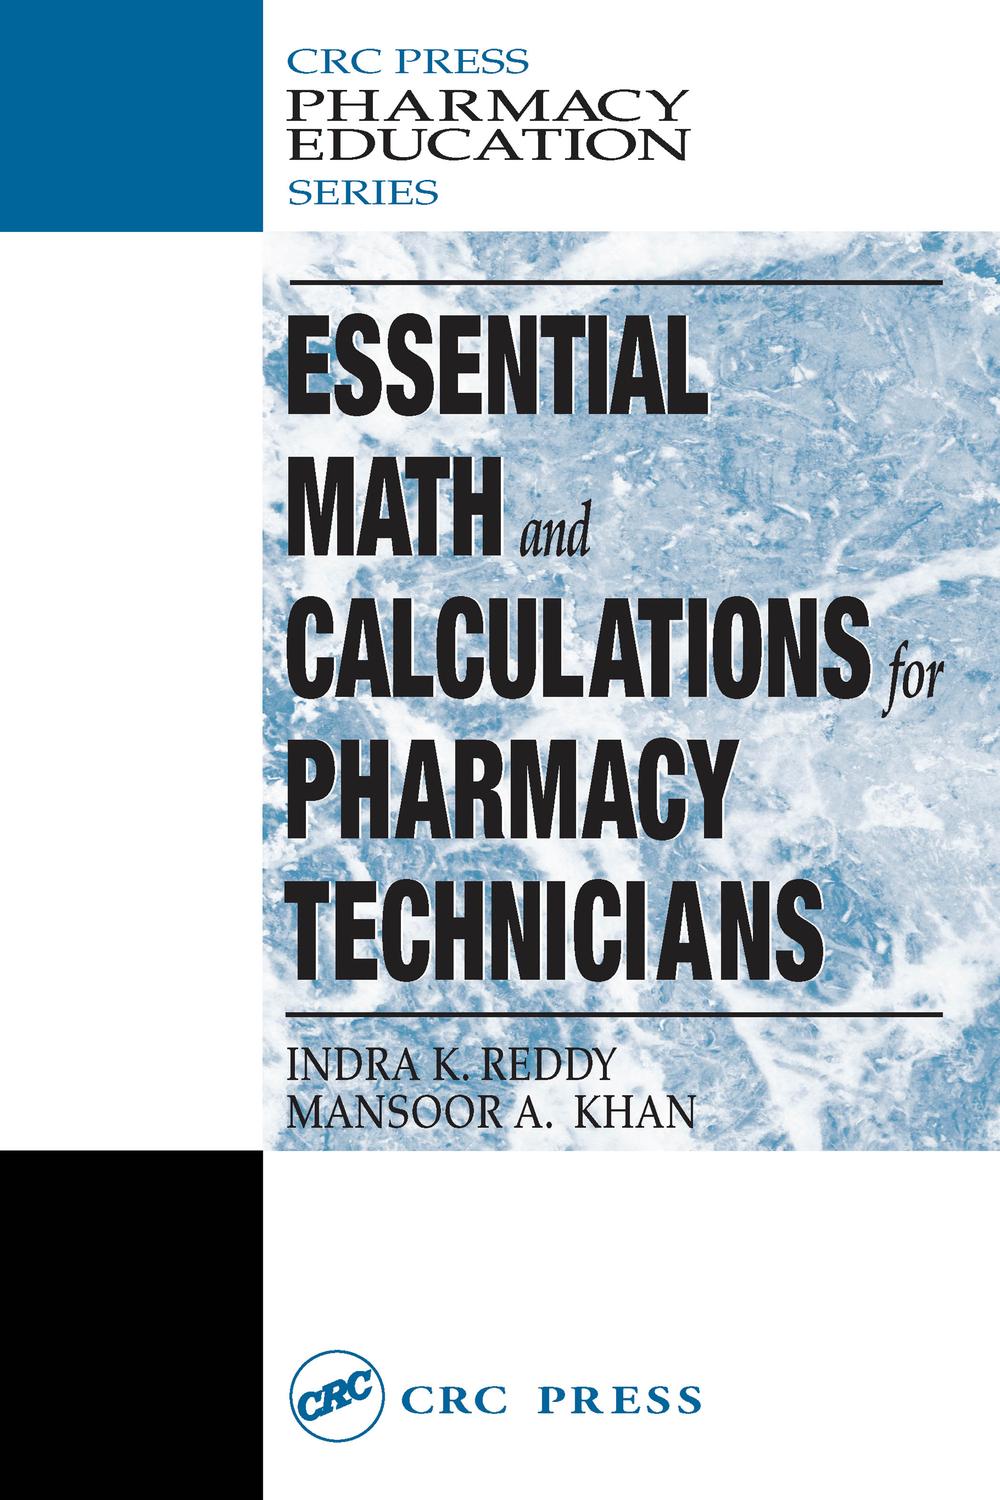 Essential Math and Calculations for Pharmacy Technicians - Indra K. Reddy, Mansoor A. Khan